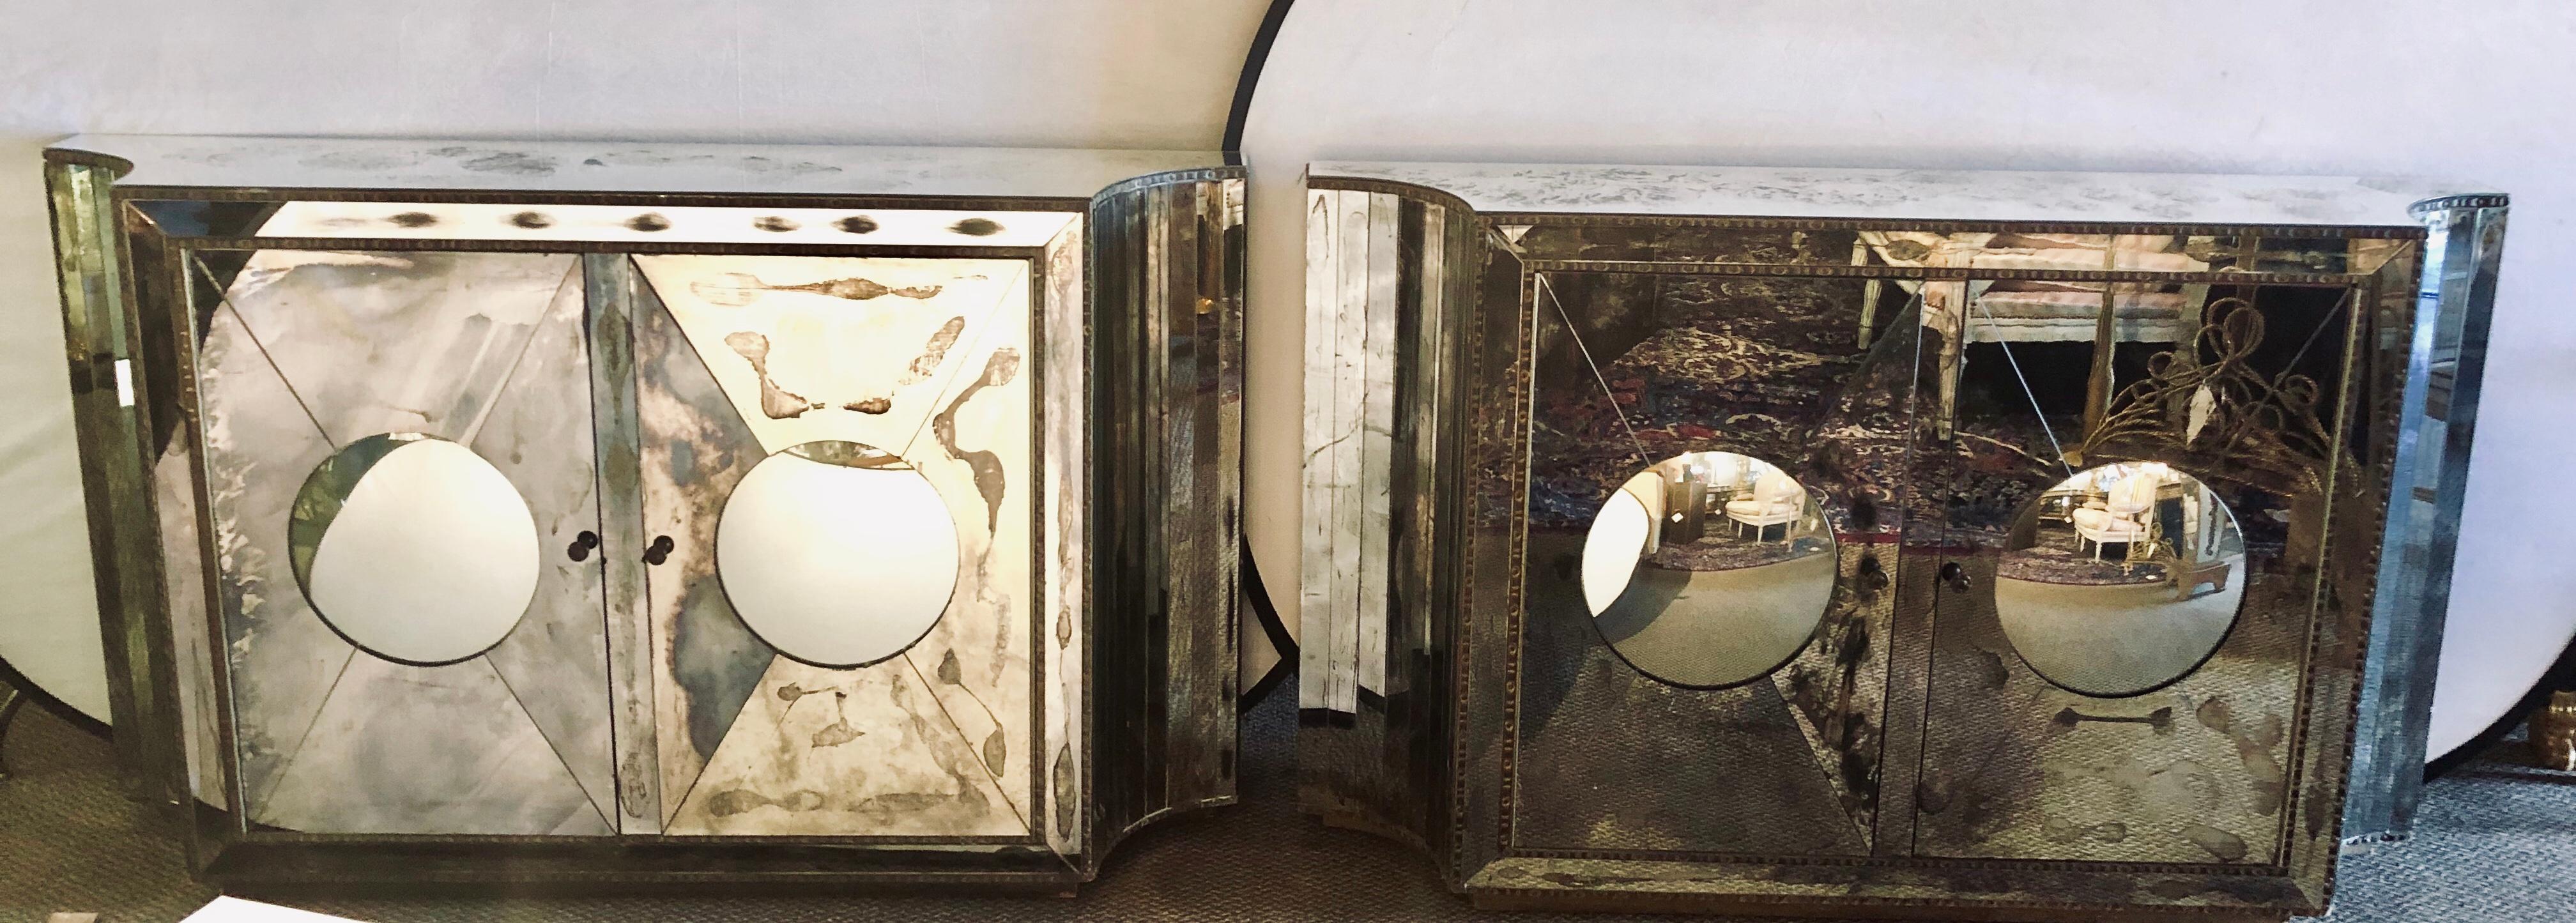 Pair of stunning one of a kind Art Deco rare concave sided with circular convex front double door all mirrored cabinets or console tables. The pair appear to be floating on air as they stand on distressed wooden carved hidden bases. Each having a